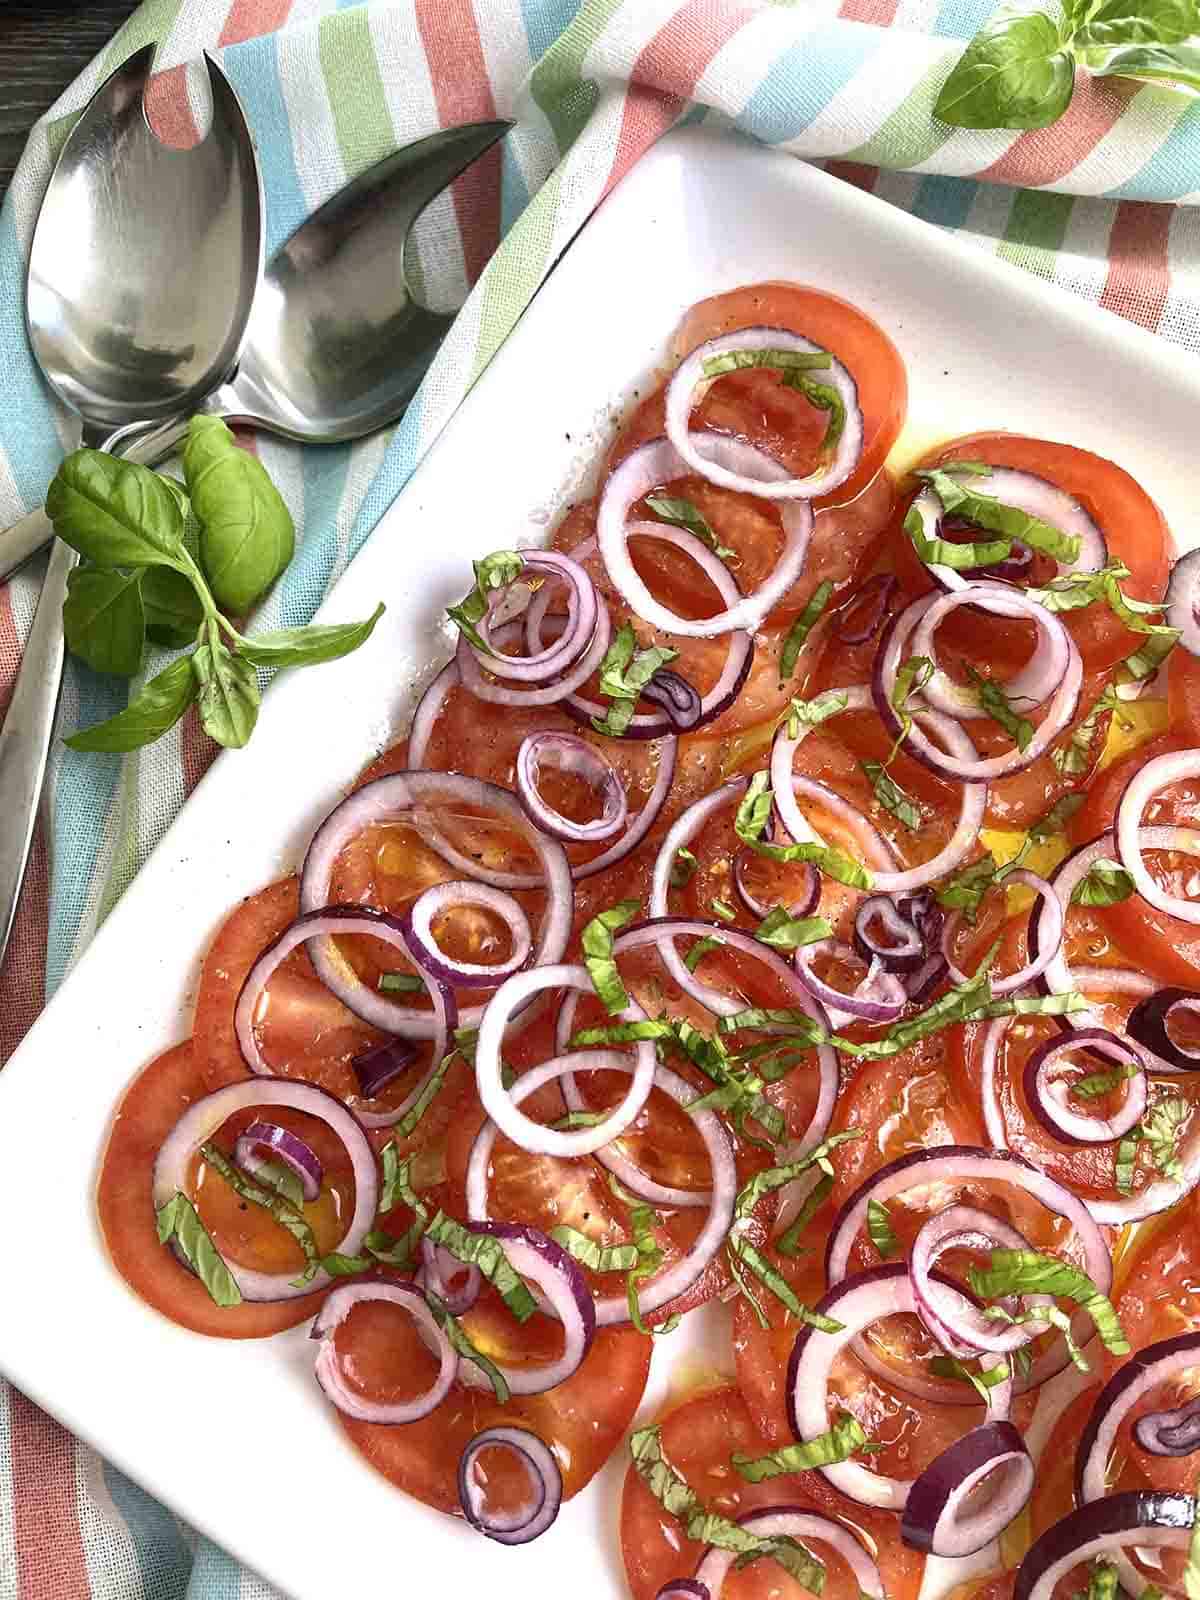 tomato salad on a square plate.